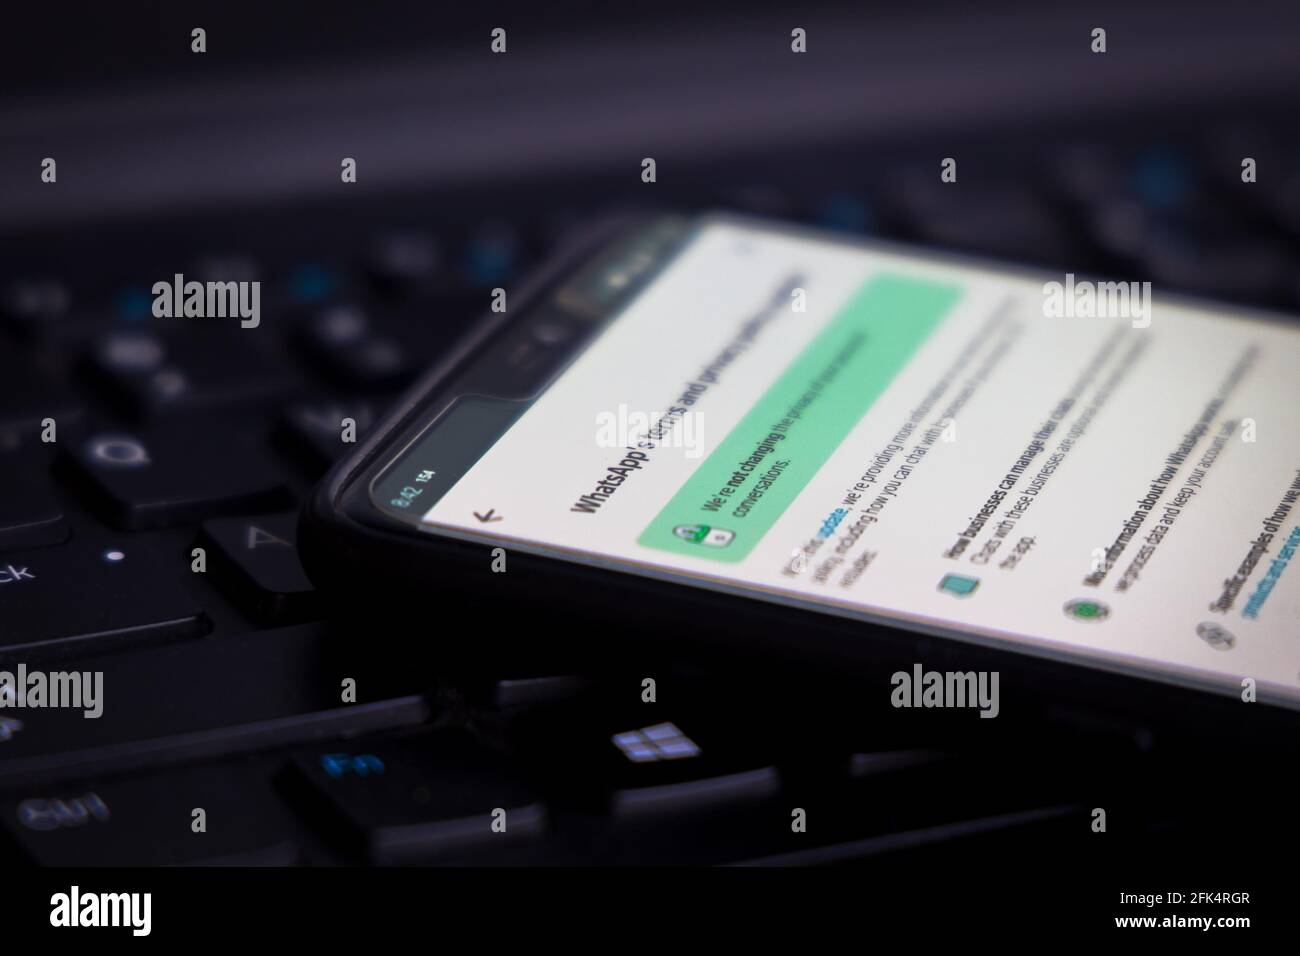 WhatsApp Terms of Service on a smartphone against a PC computer. Stock Photo